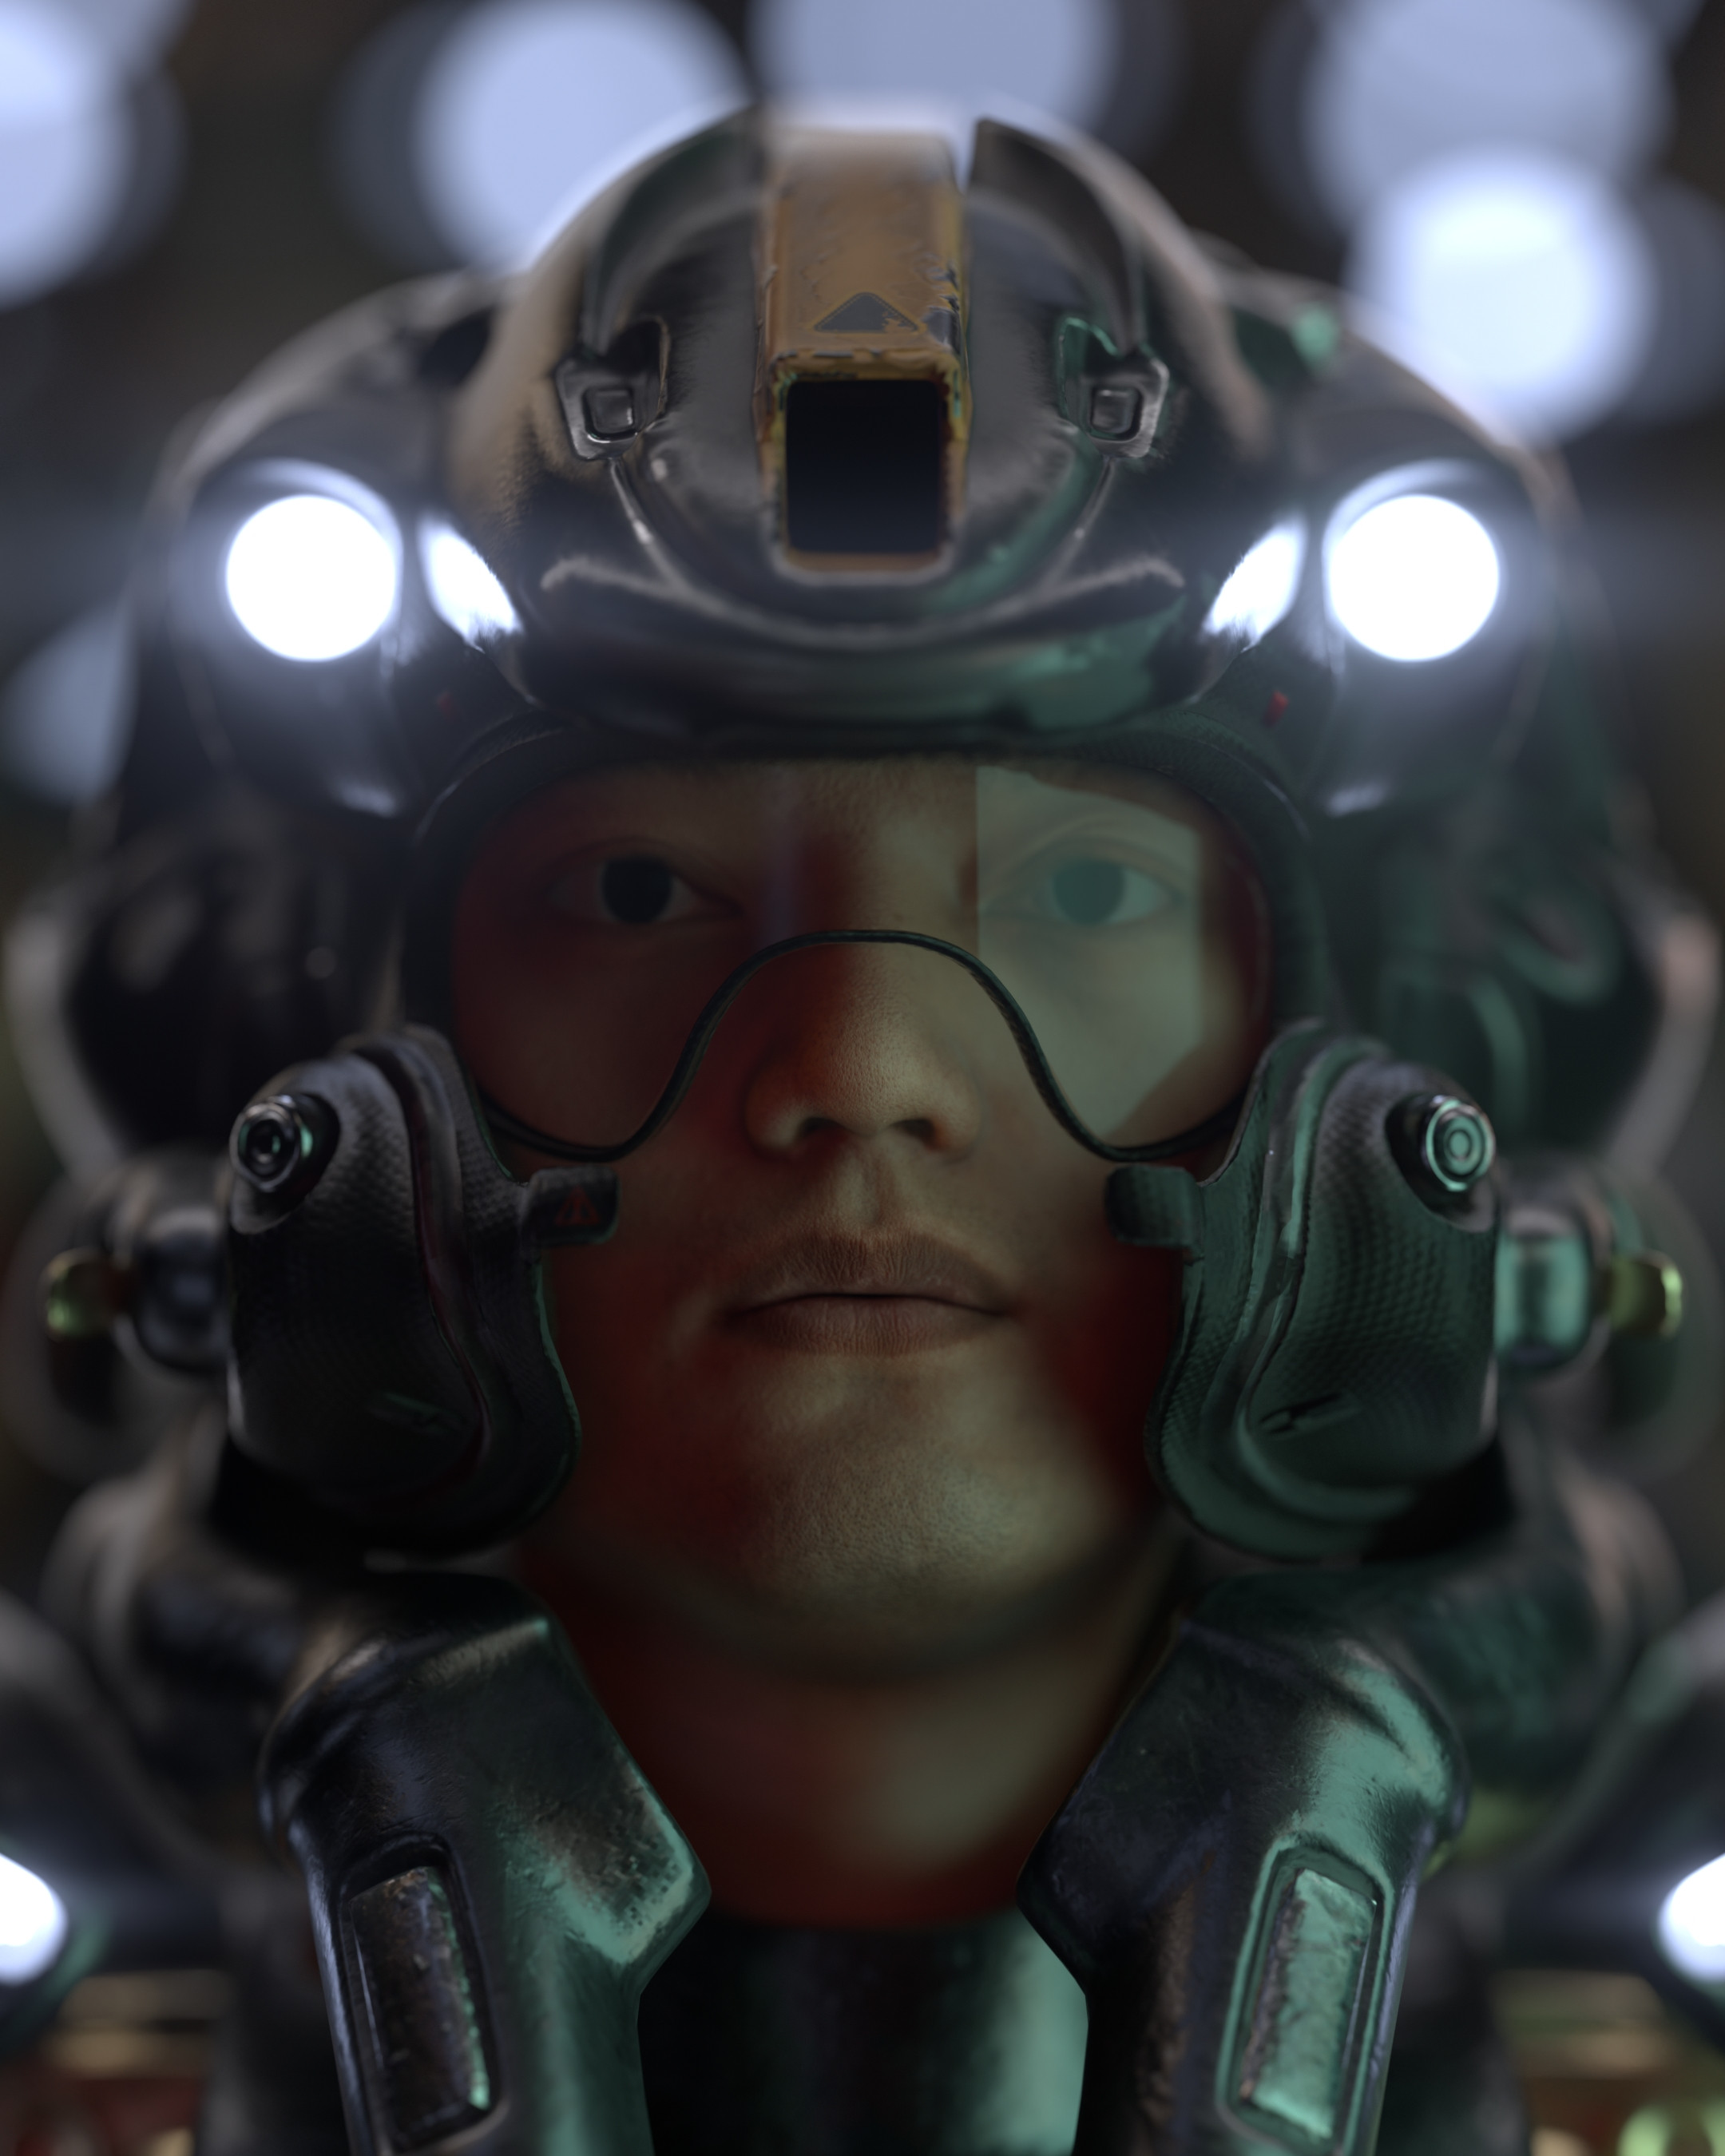 raw render from octane